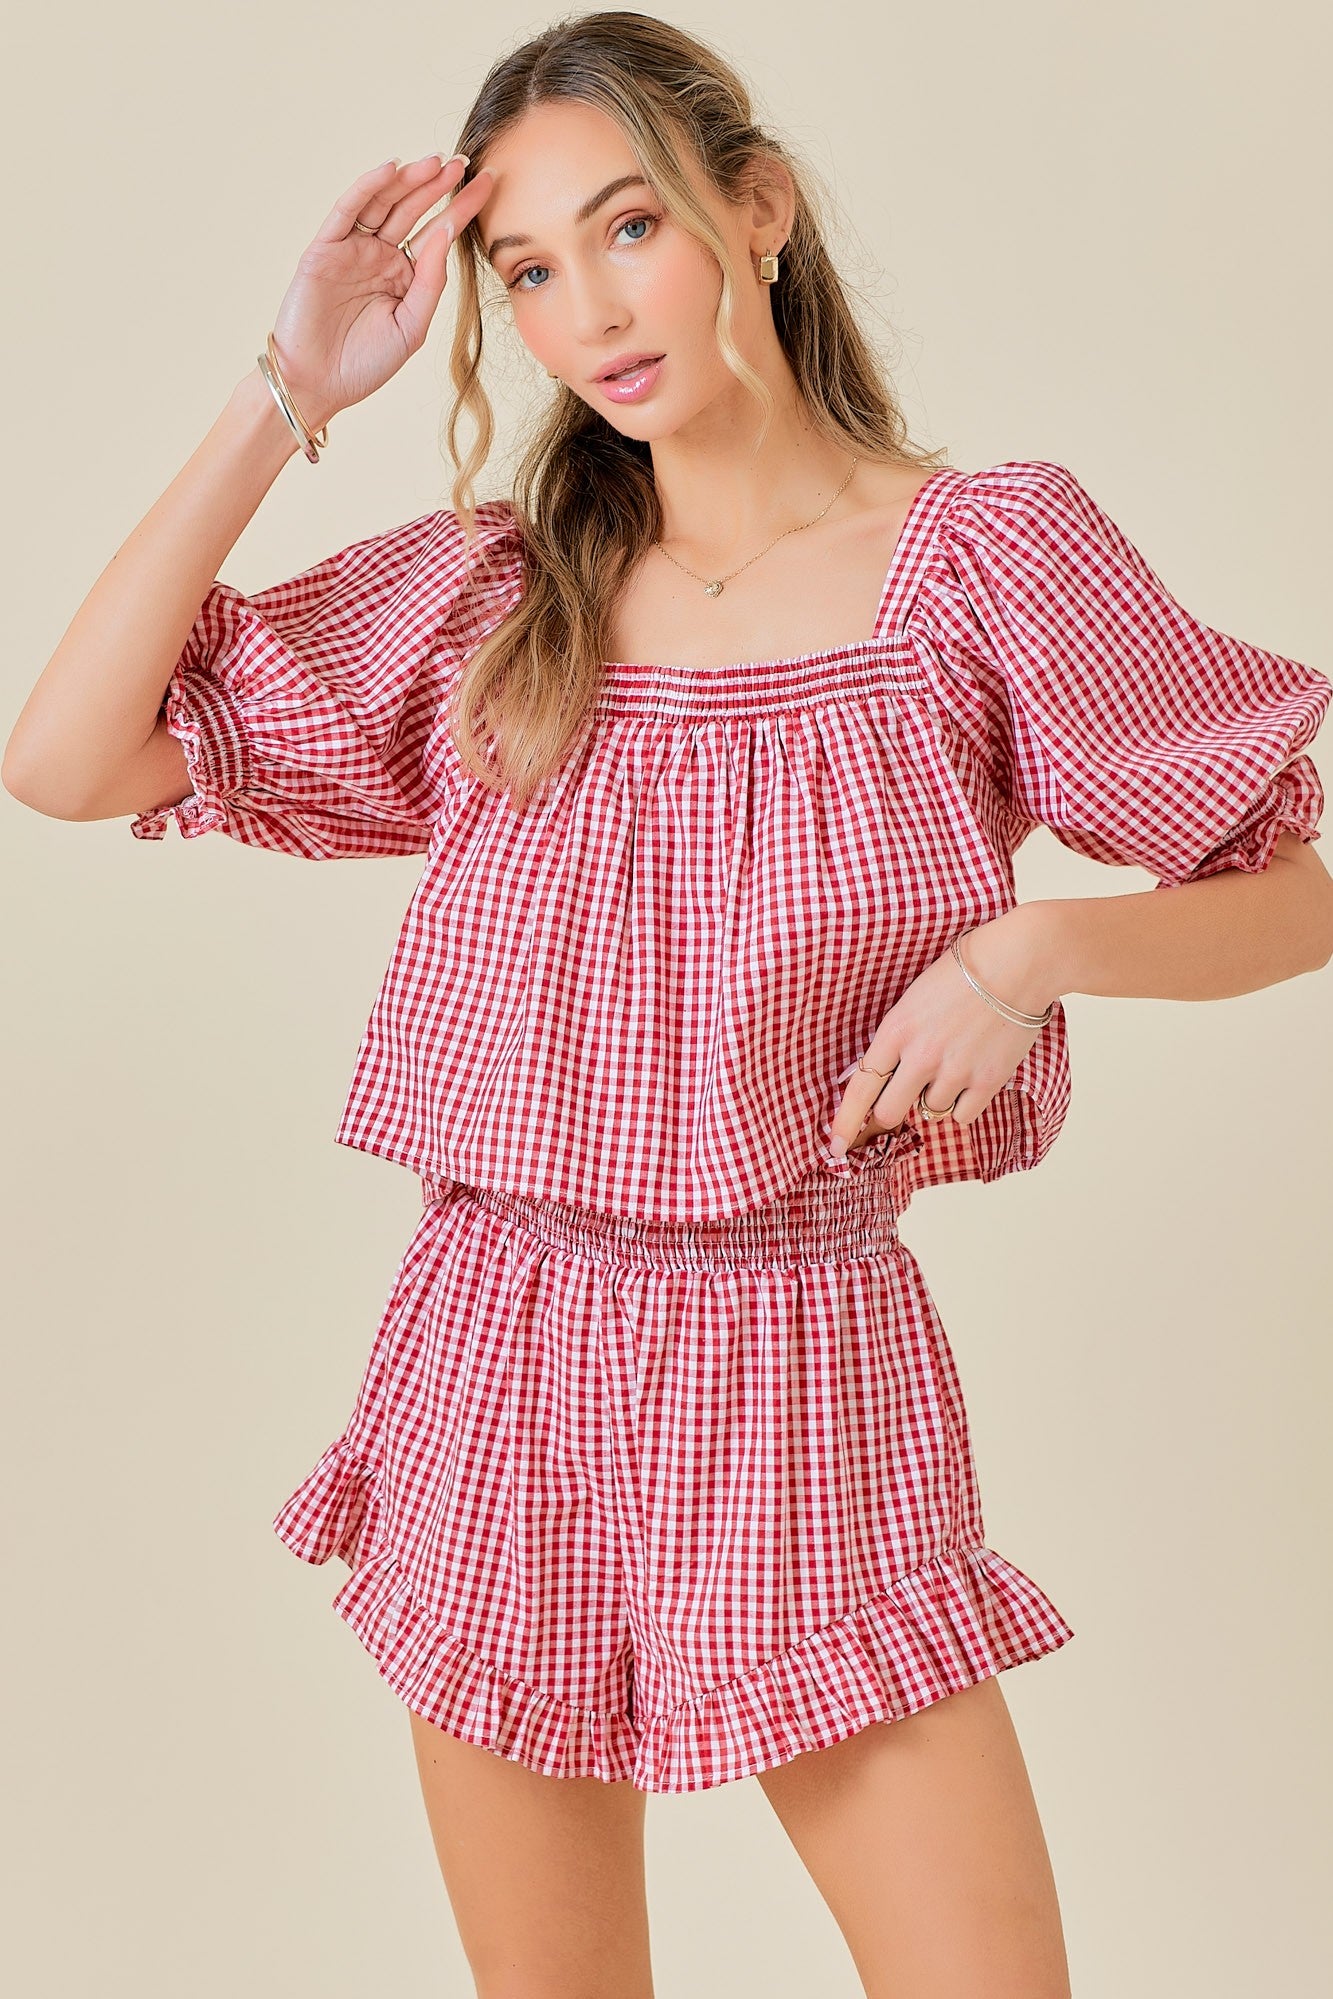 MOLLIE SQUARE NECK PUFF SLEEVE GINGHAM TOP IN RED & WHITE